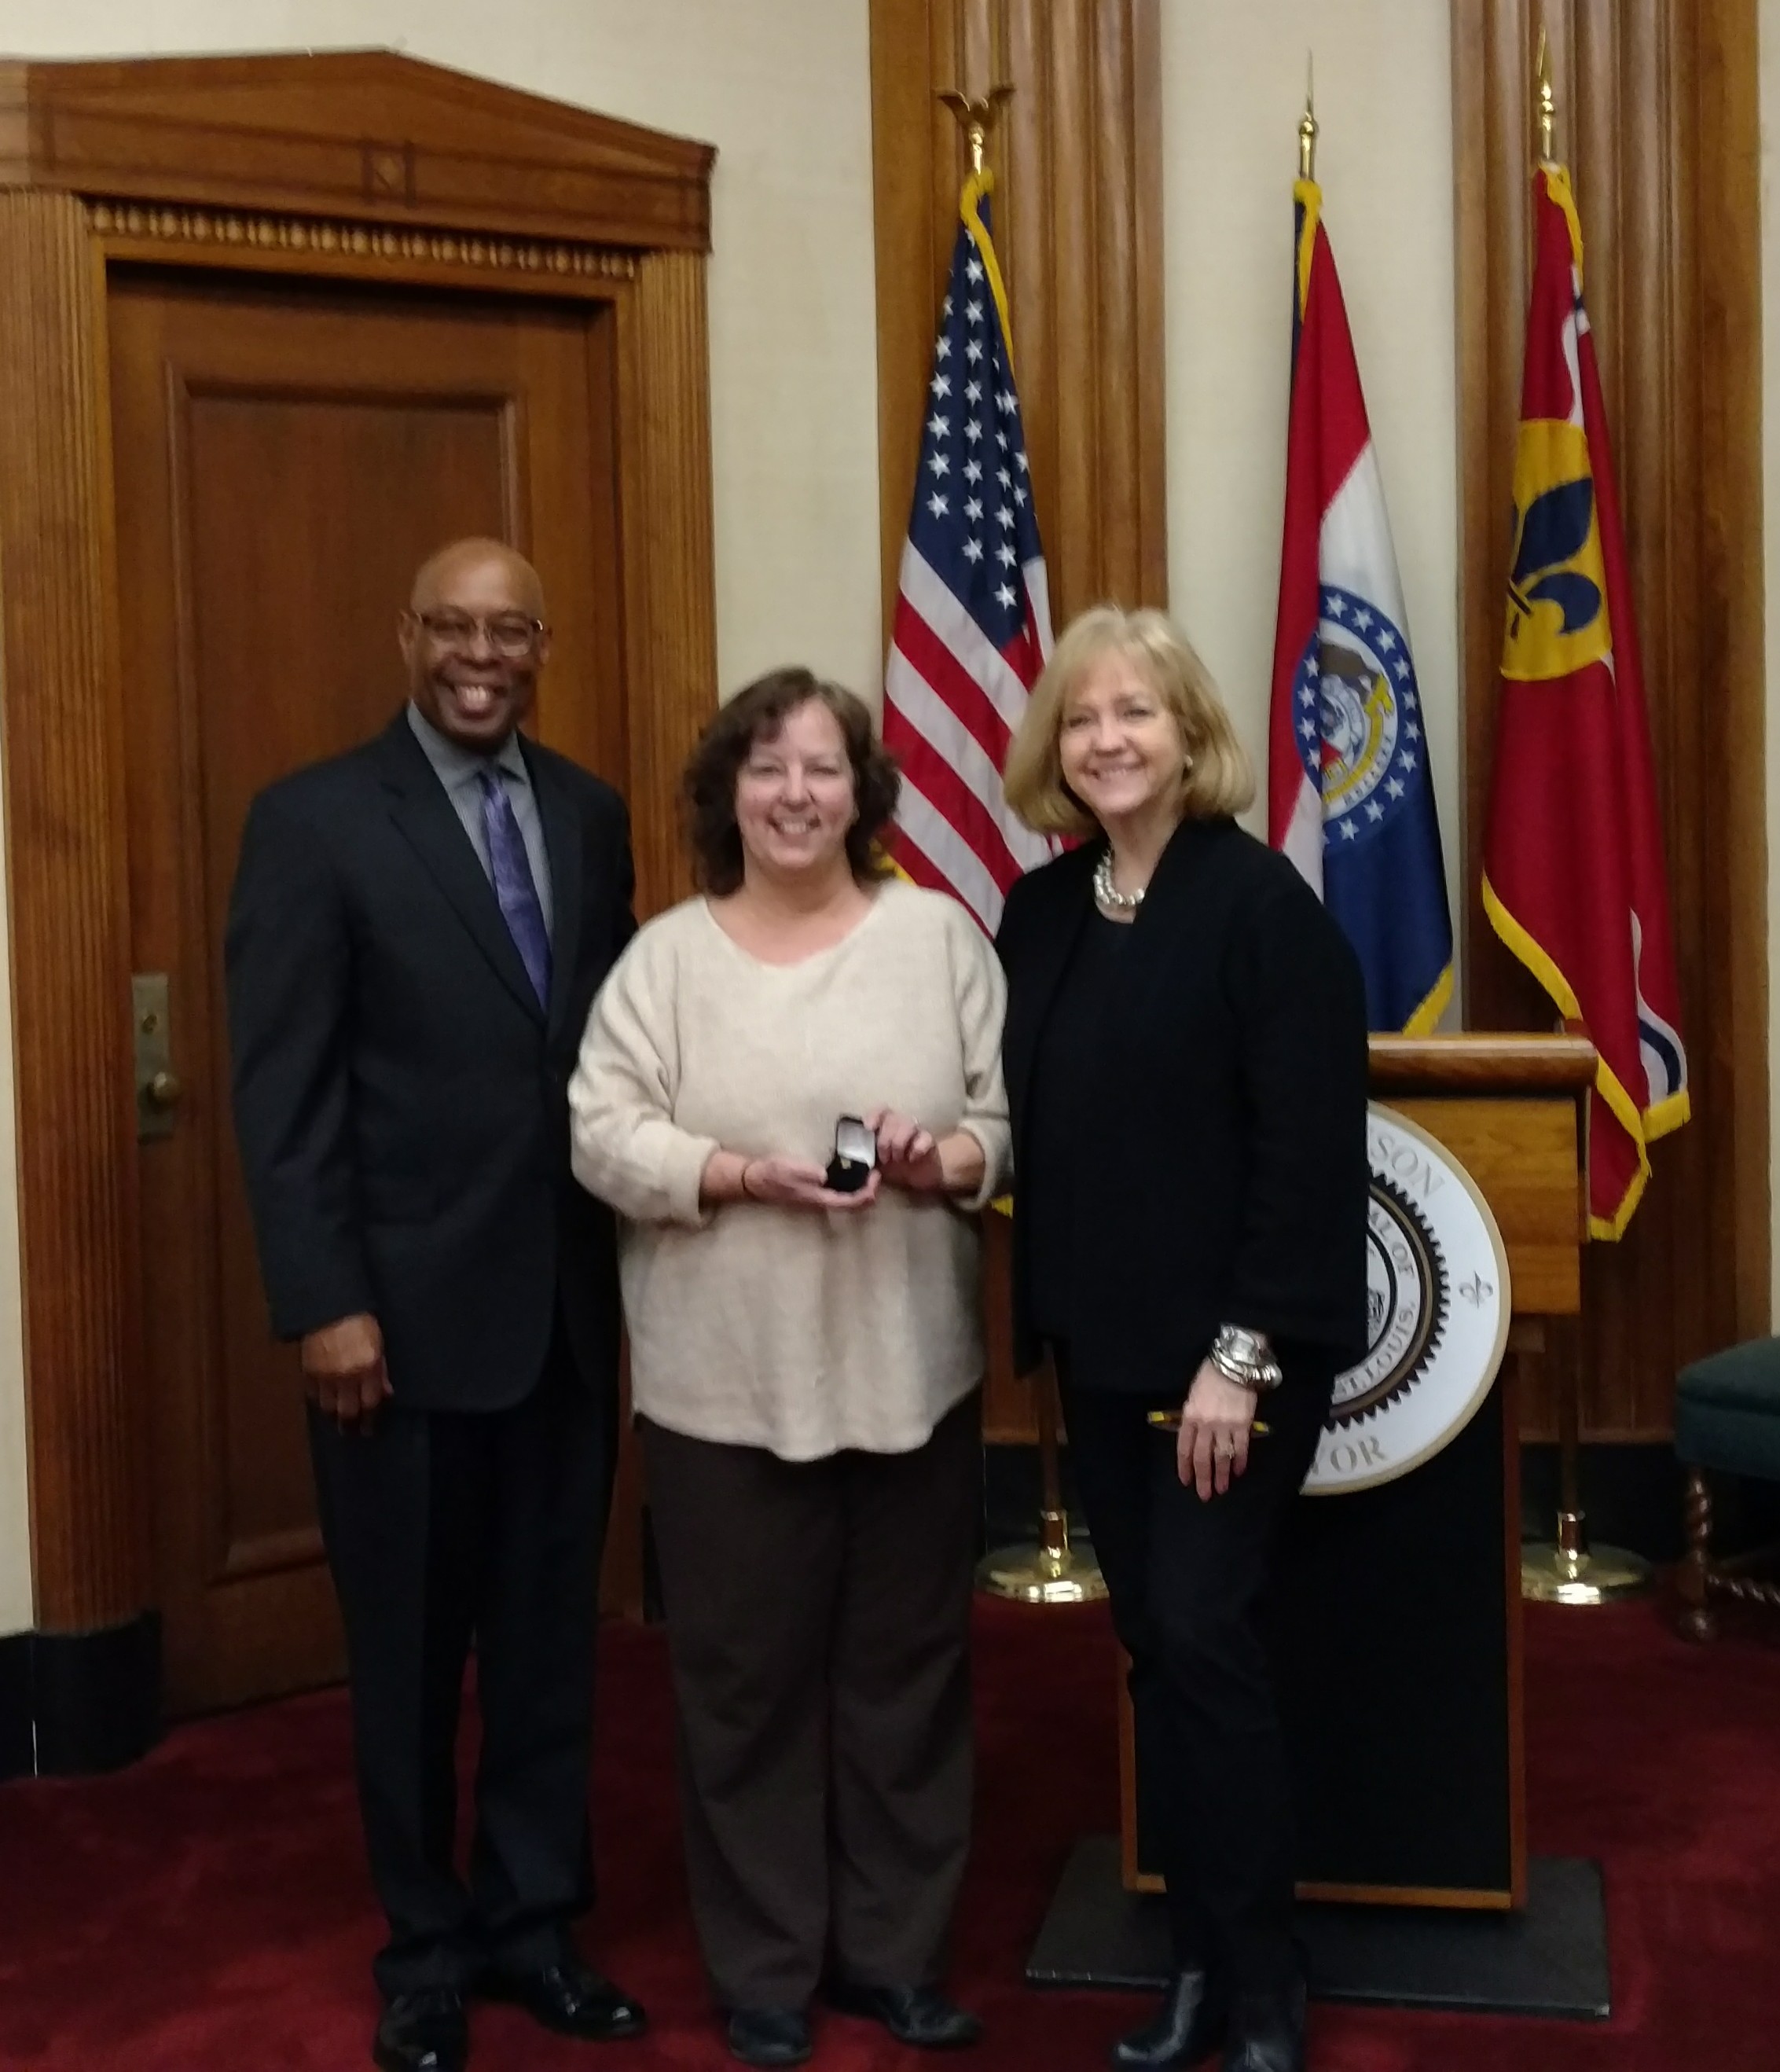 From left:  Judge Jimmie Edwards, Anna Funk and Mayor Lyda Krewson